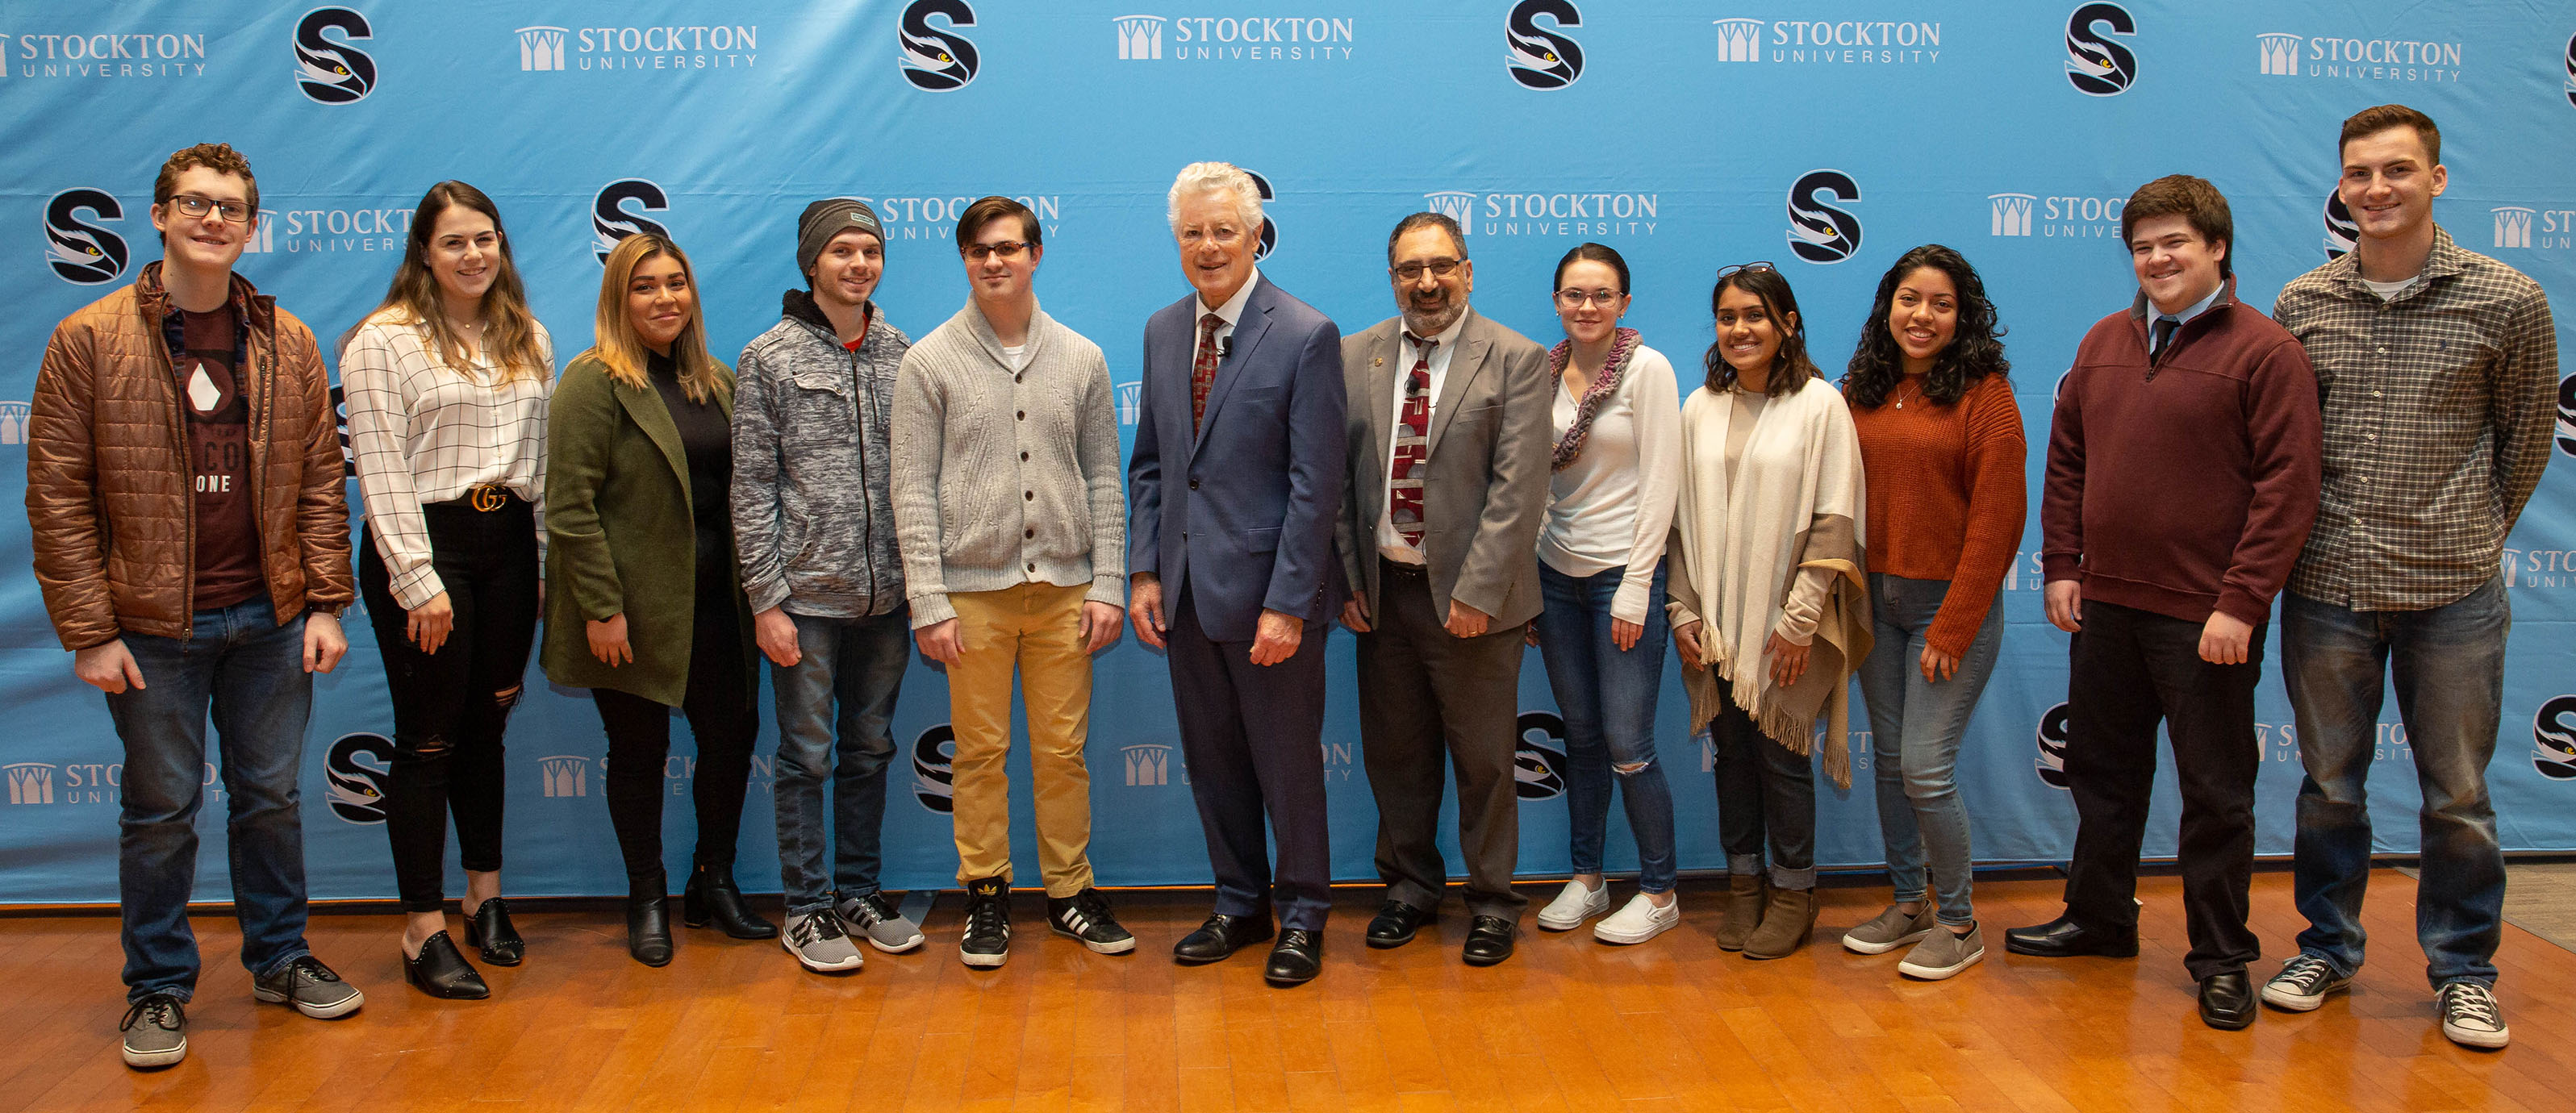 Former N.J. Governor Jim Florio, center, spoke to political science class students at Stockton